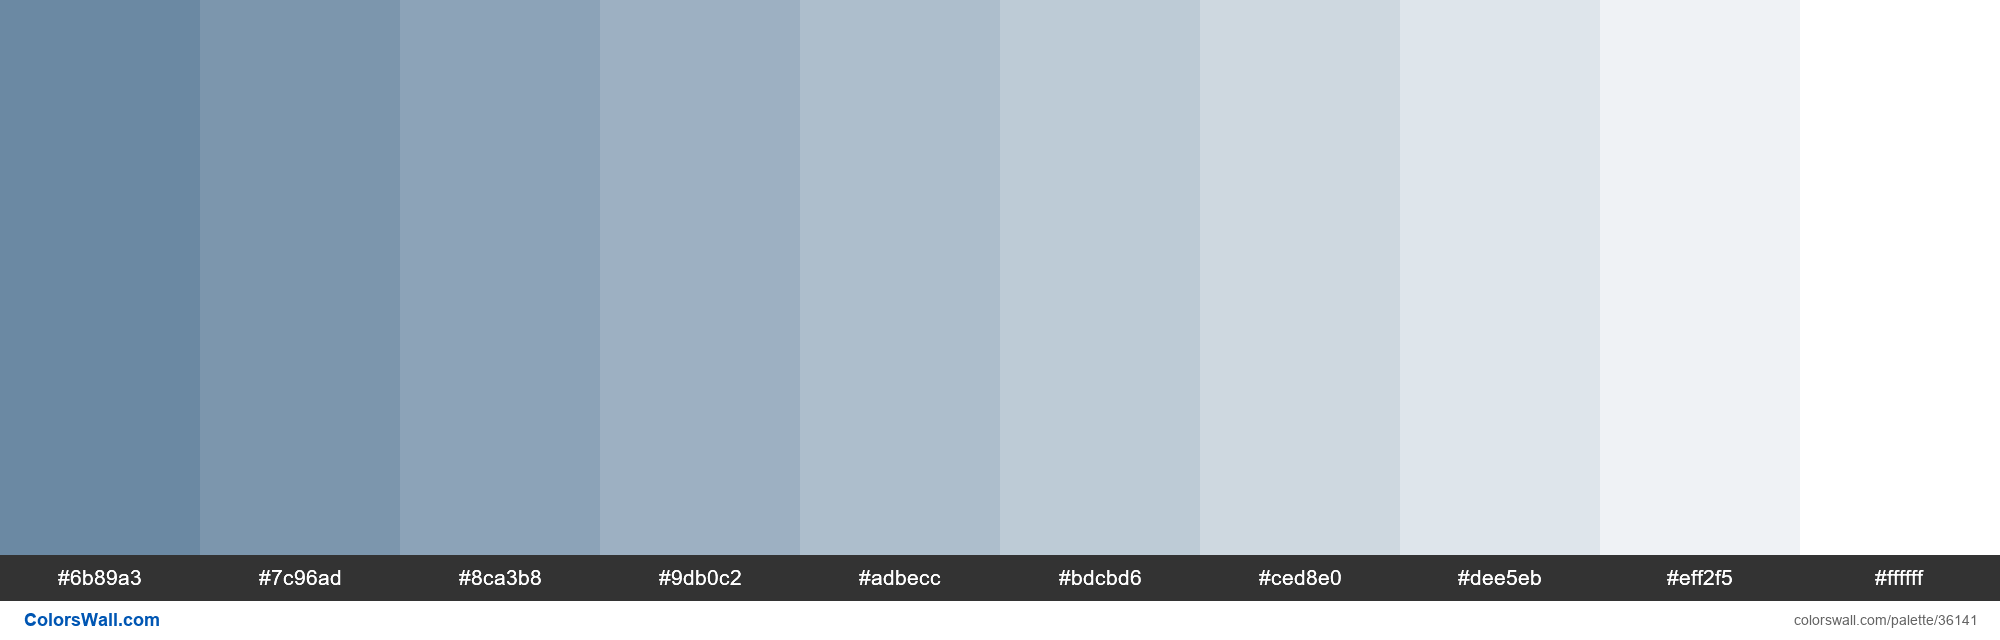 colorswall on X: Tints XKCD Color slate blue #5b7c99 hex #6b89a3